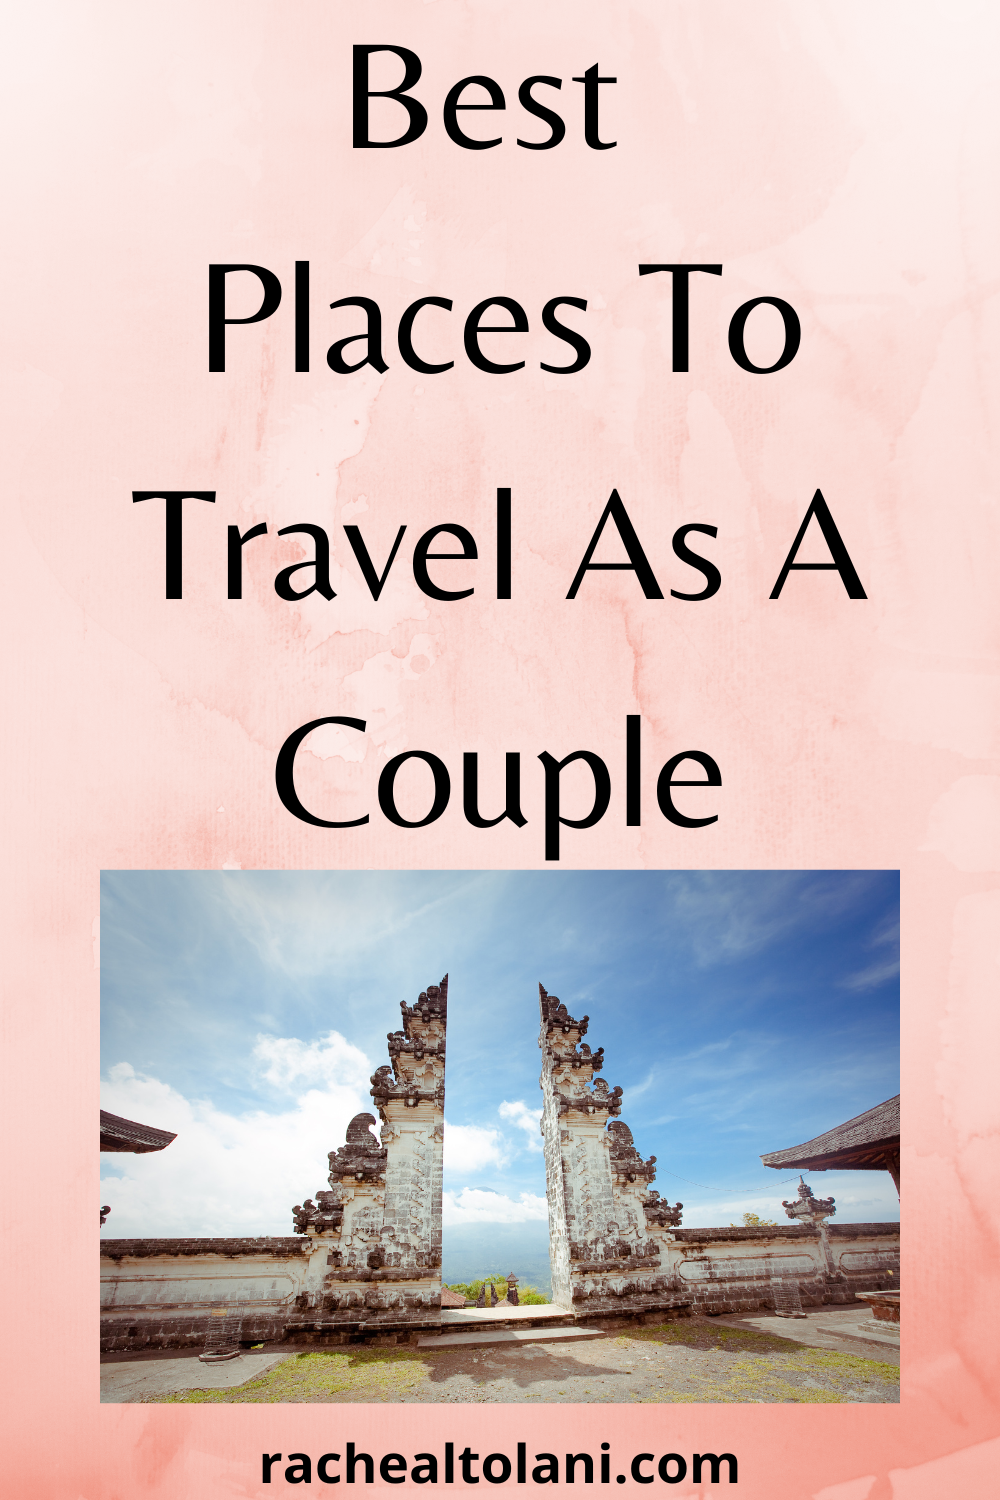 Best Places To Travel As A Couple